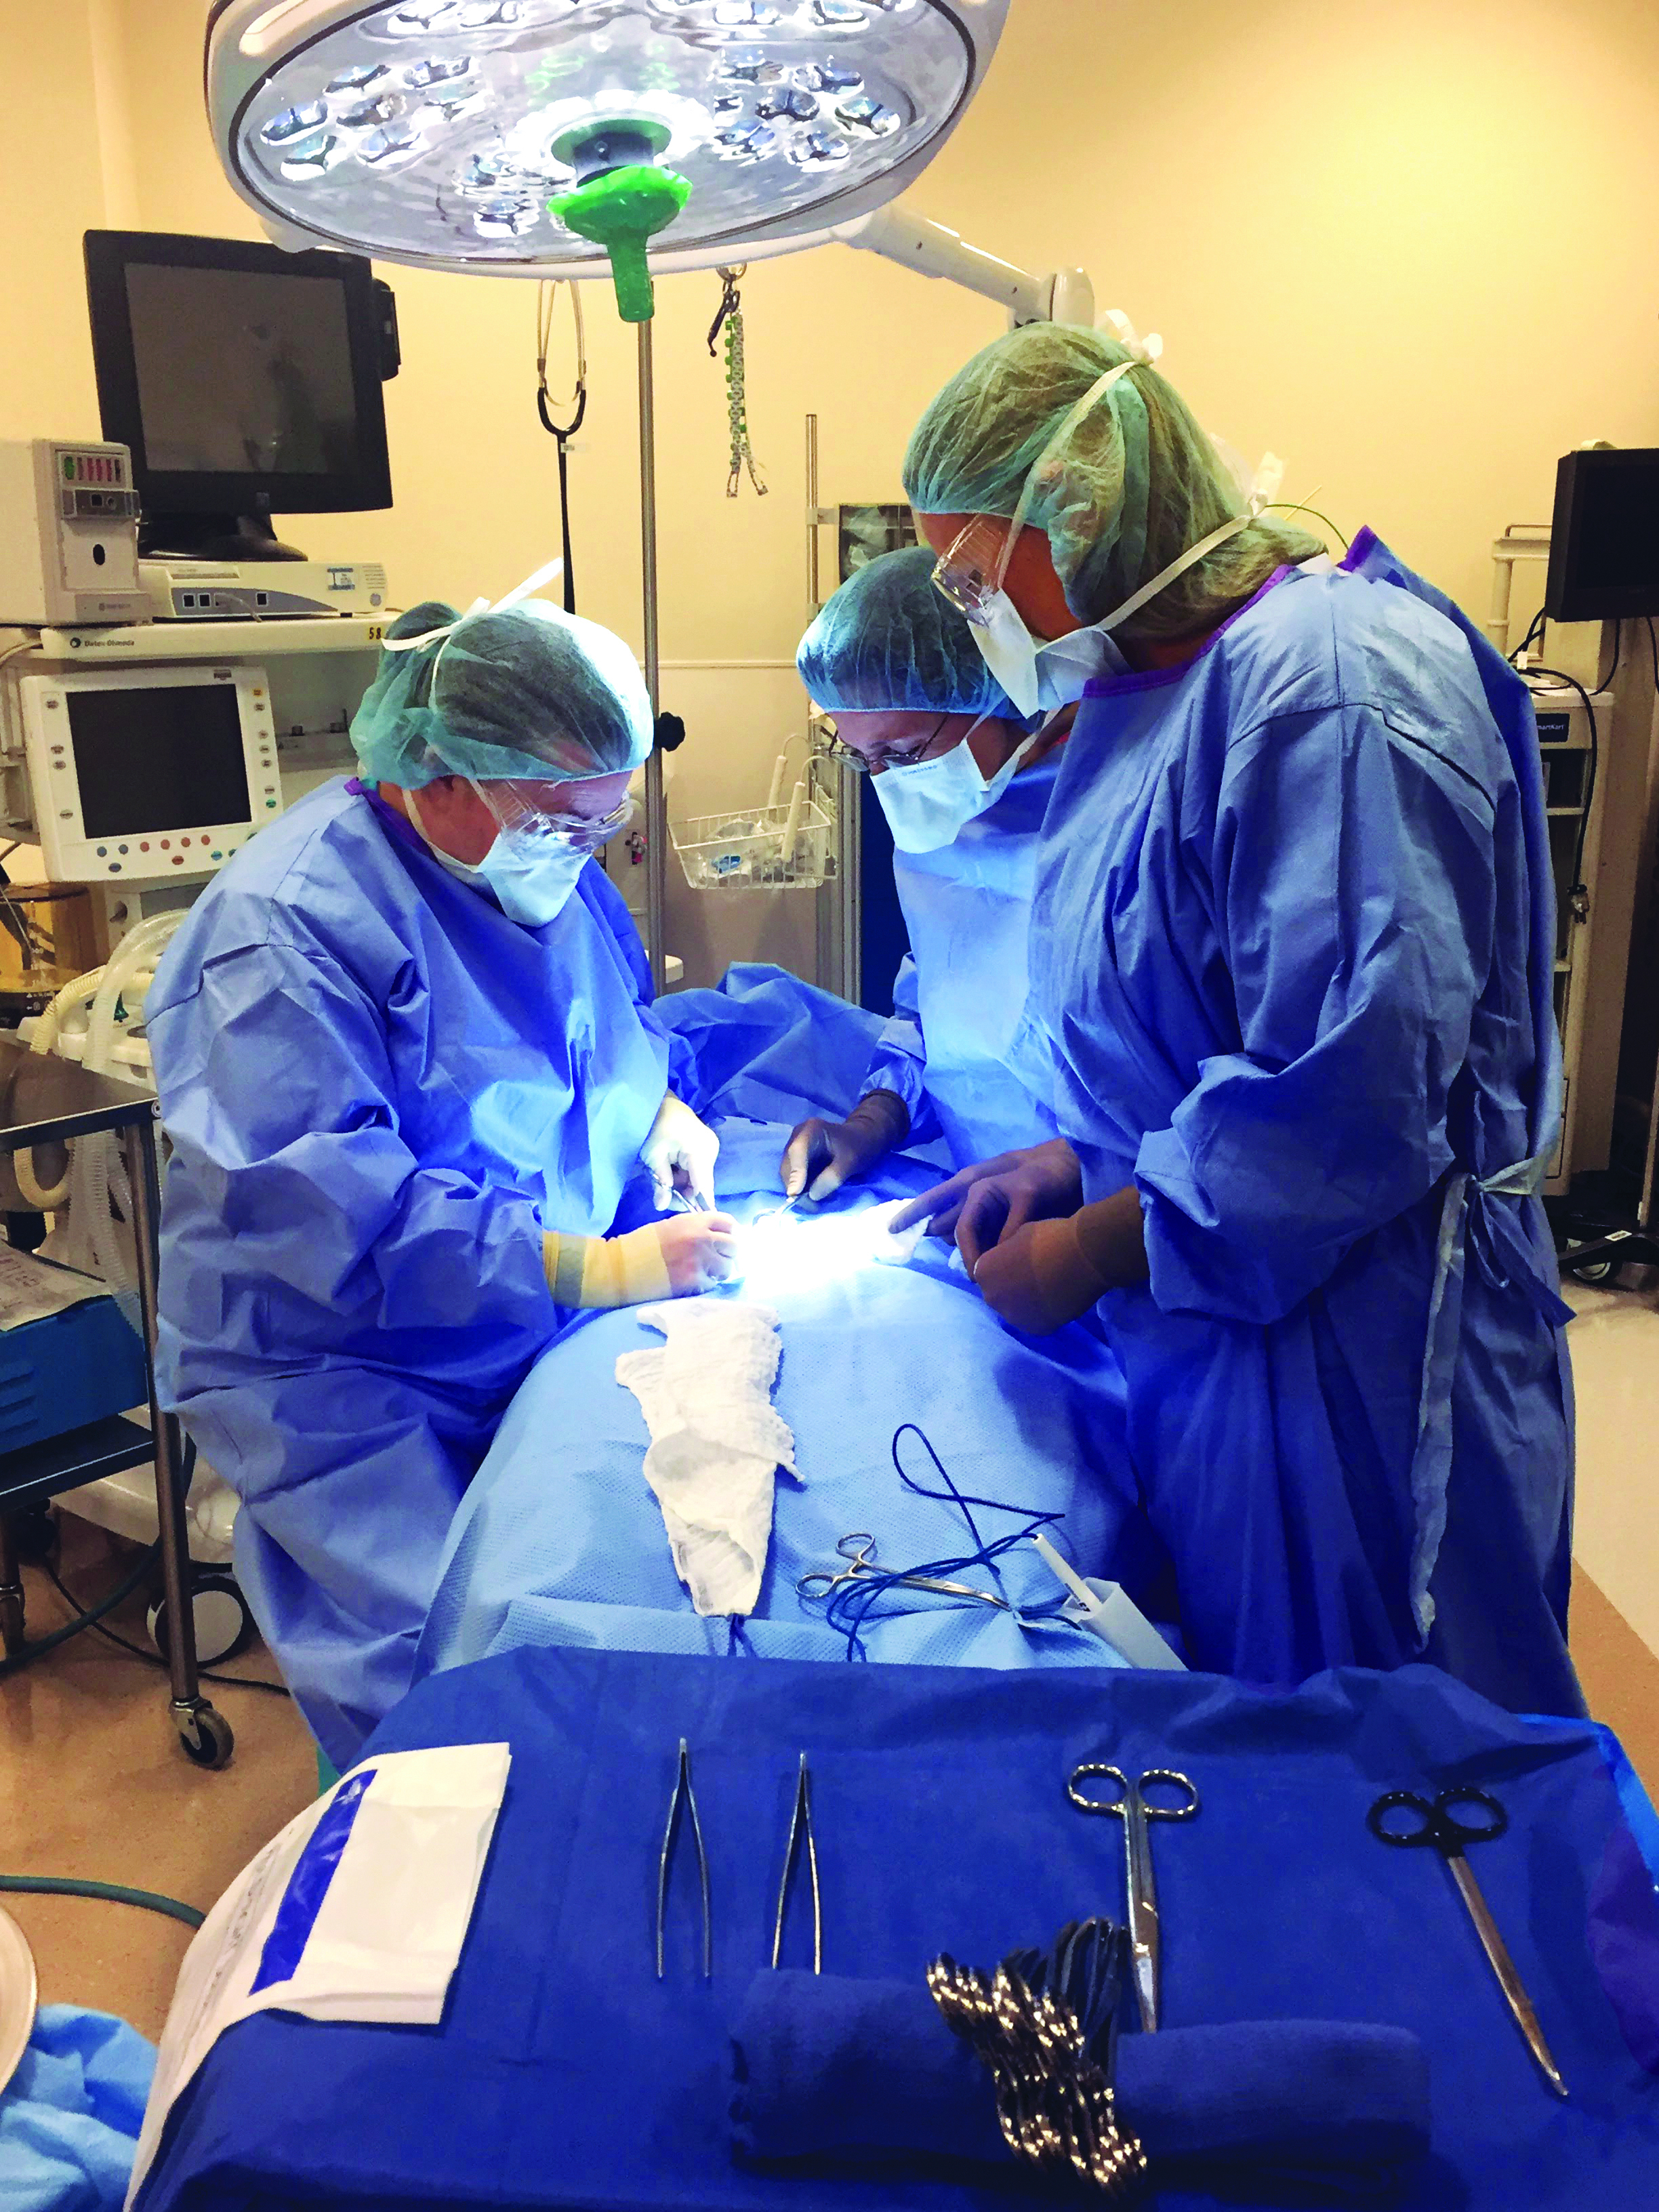 surgeons and technicians perform surgery on patient